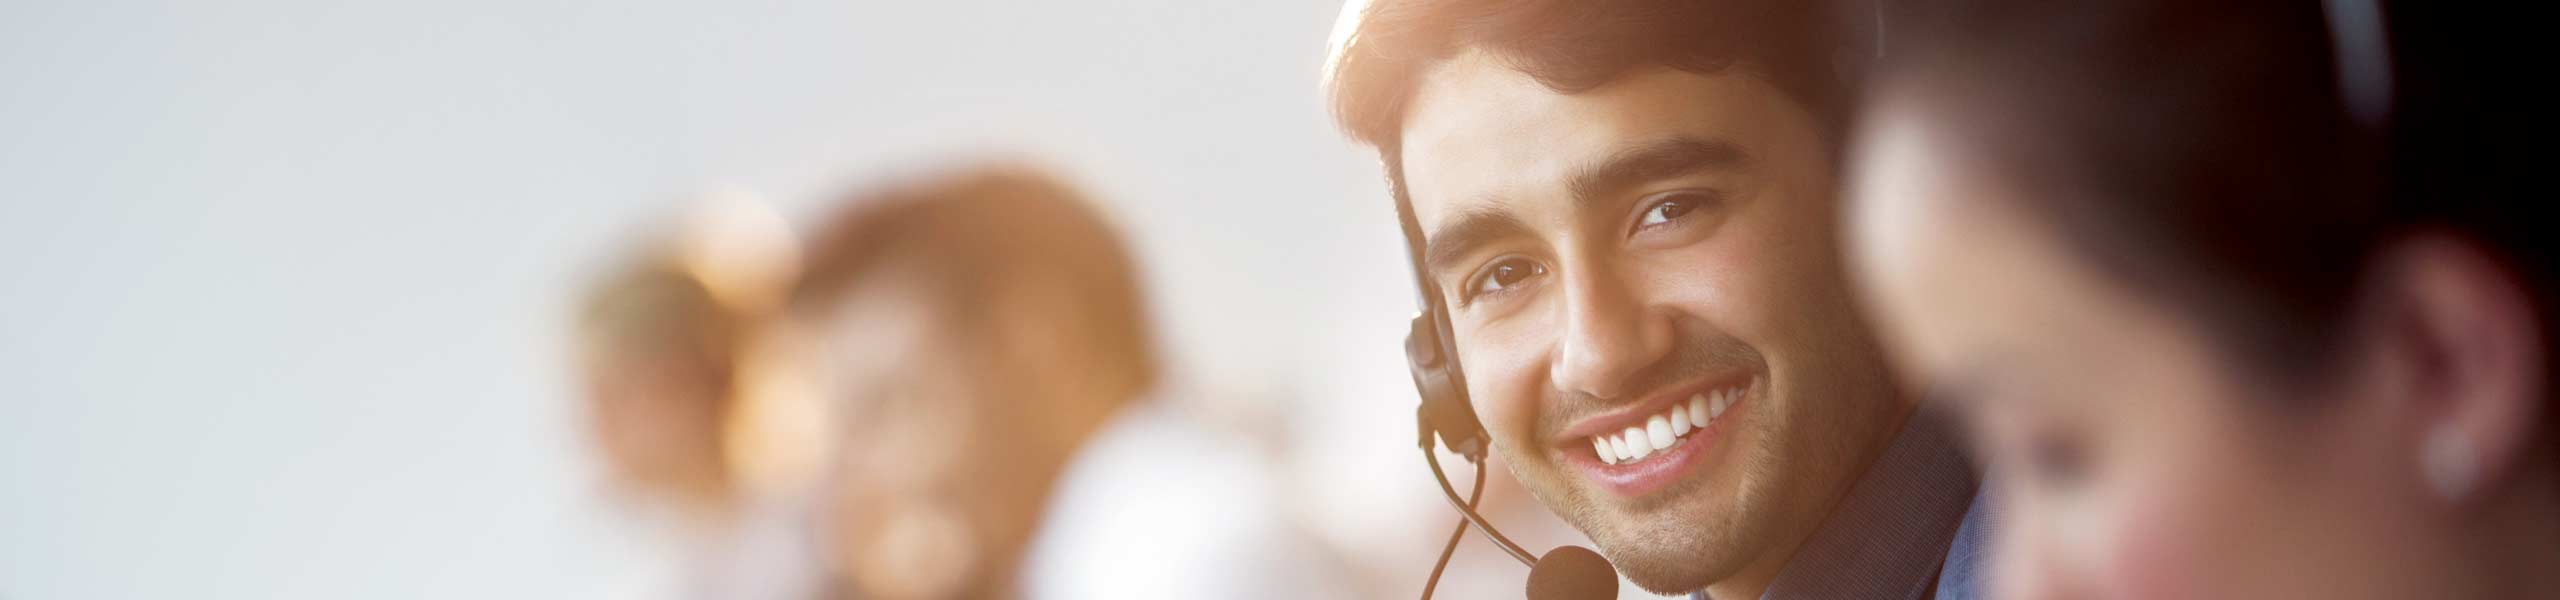 A member of a customer care team with a headset on